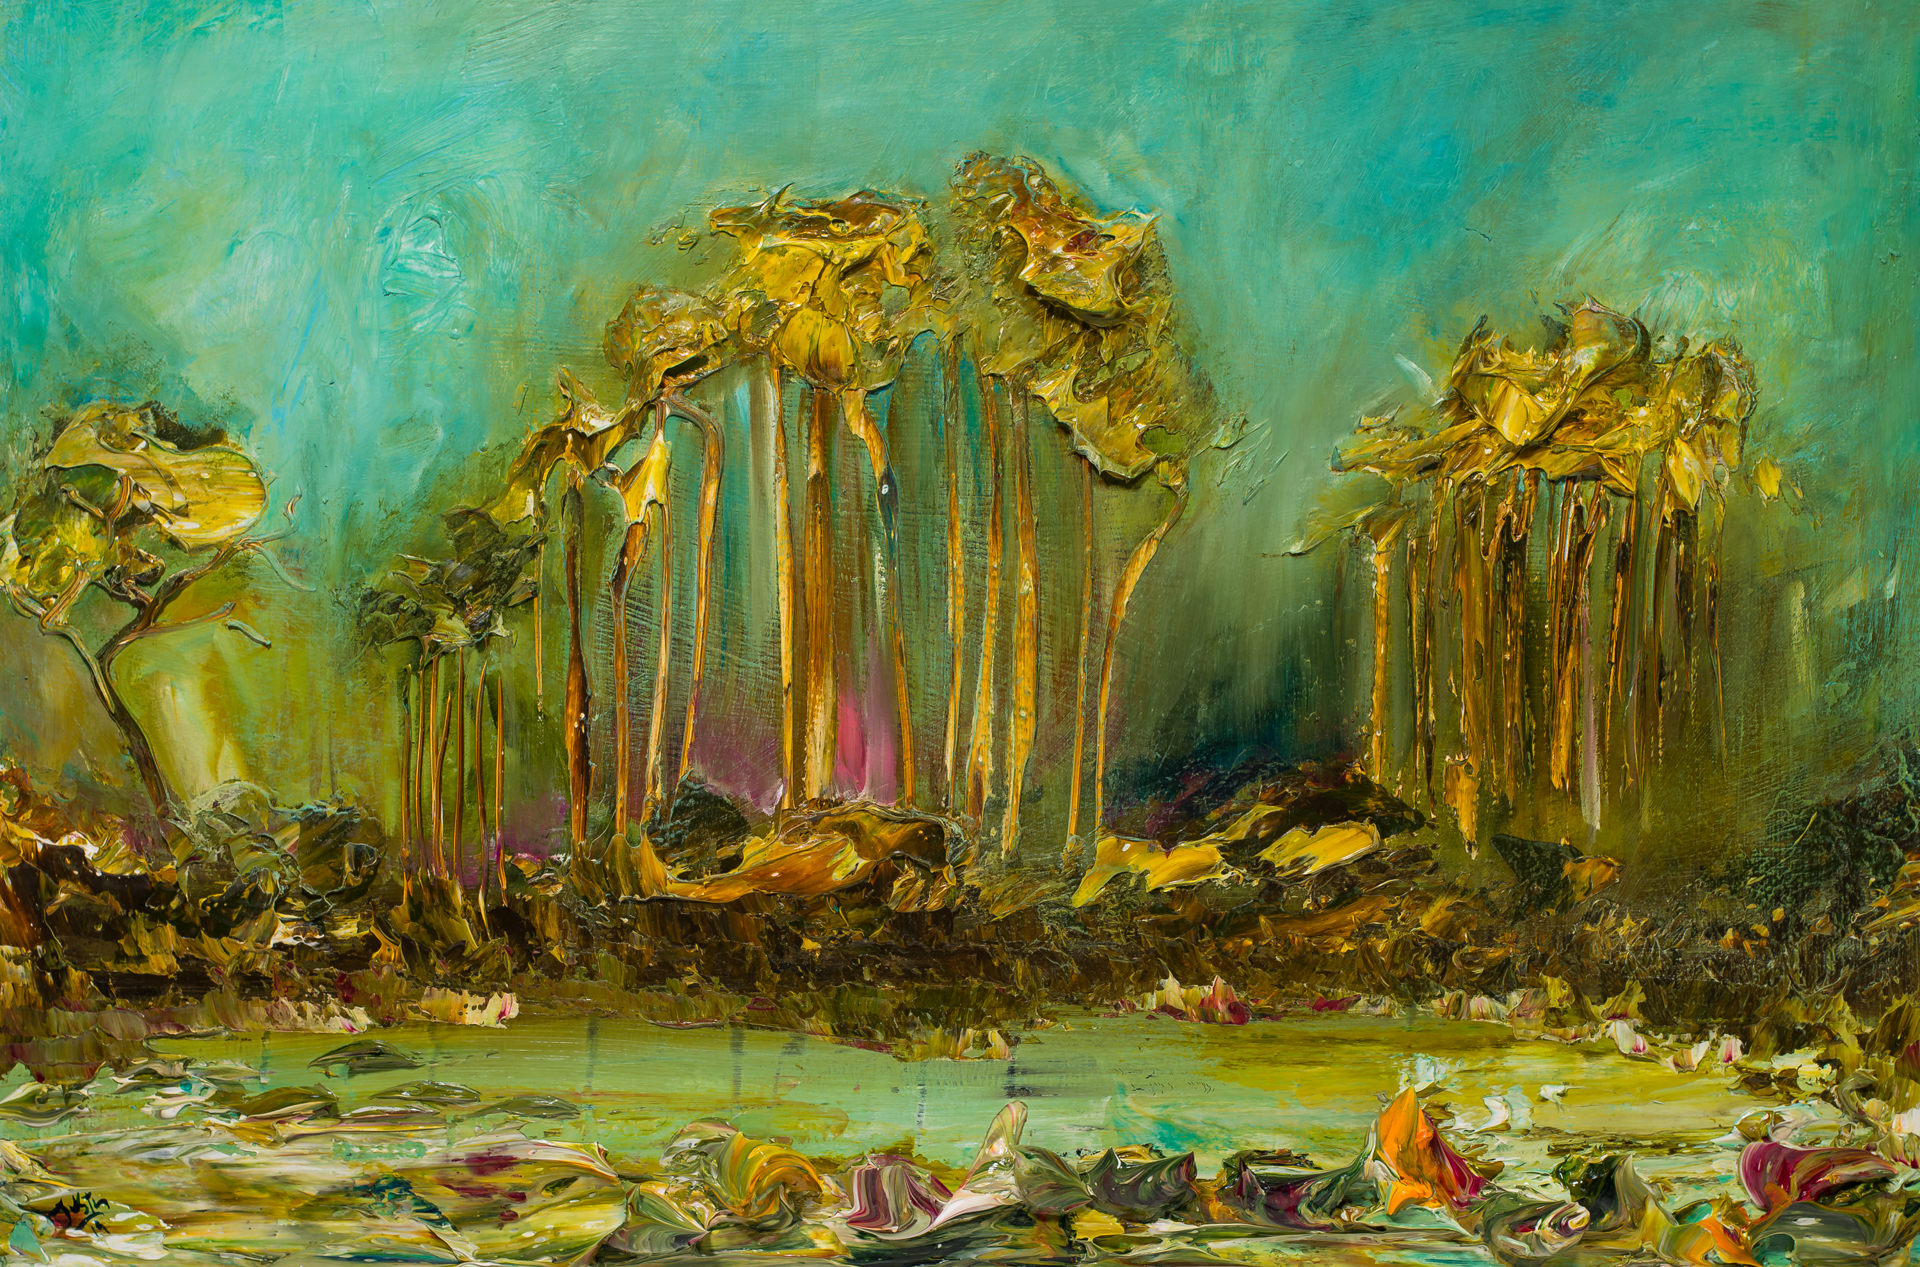 LAKESCAPE LS36X24-2019-093 by Justin Gaffrey